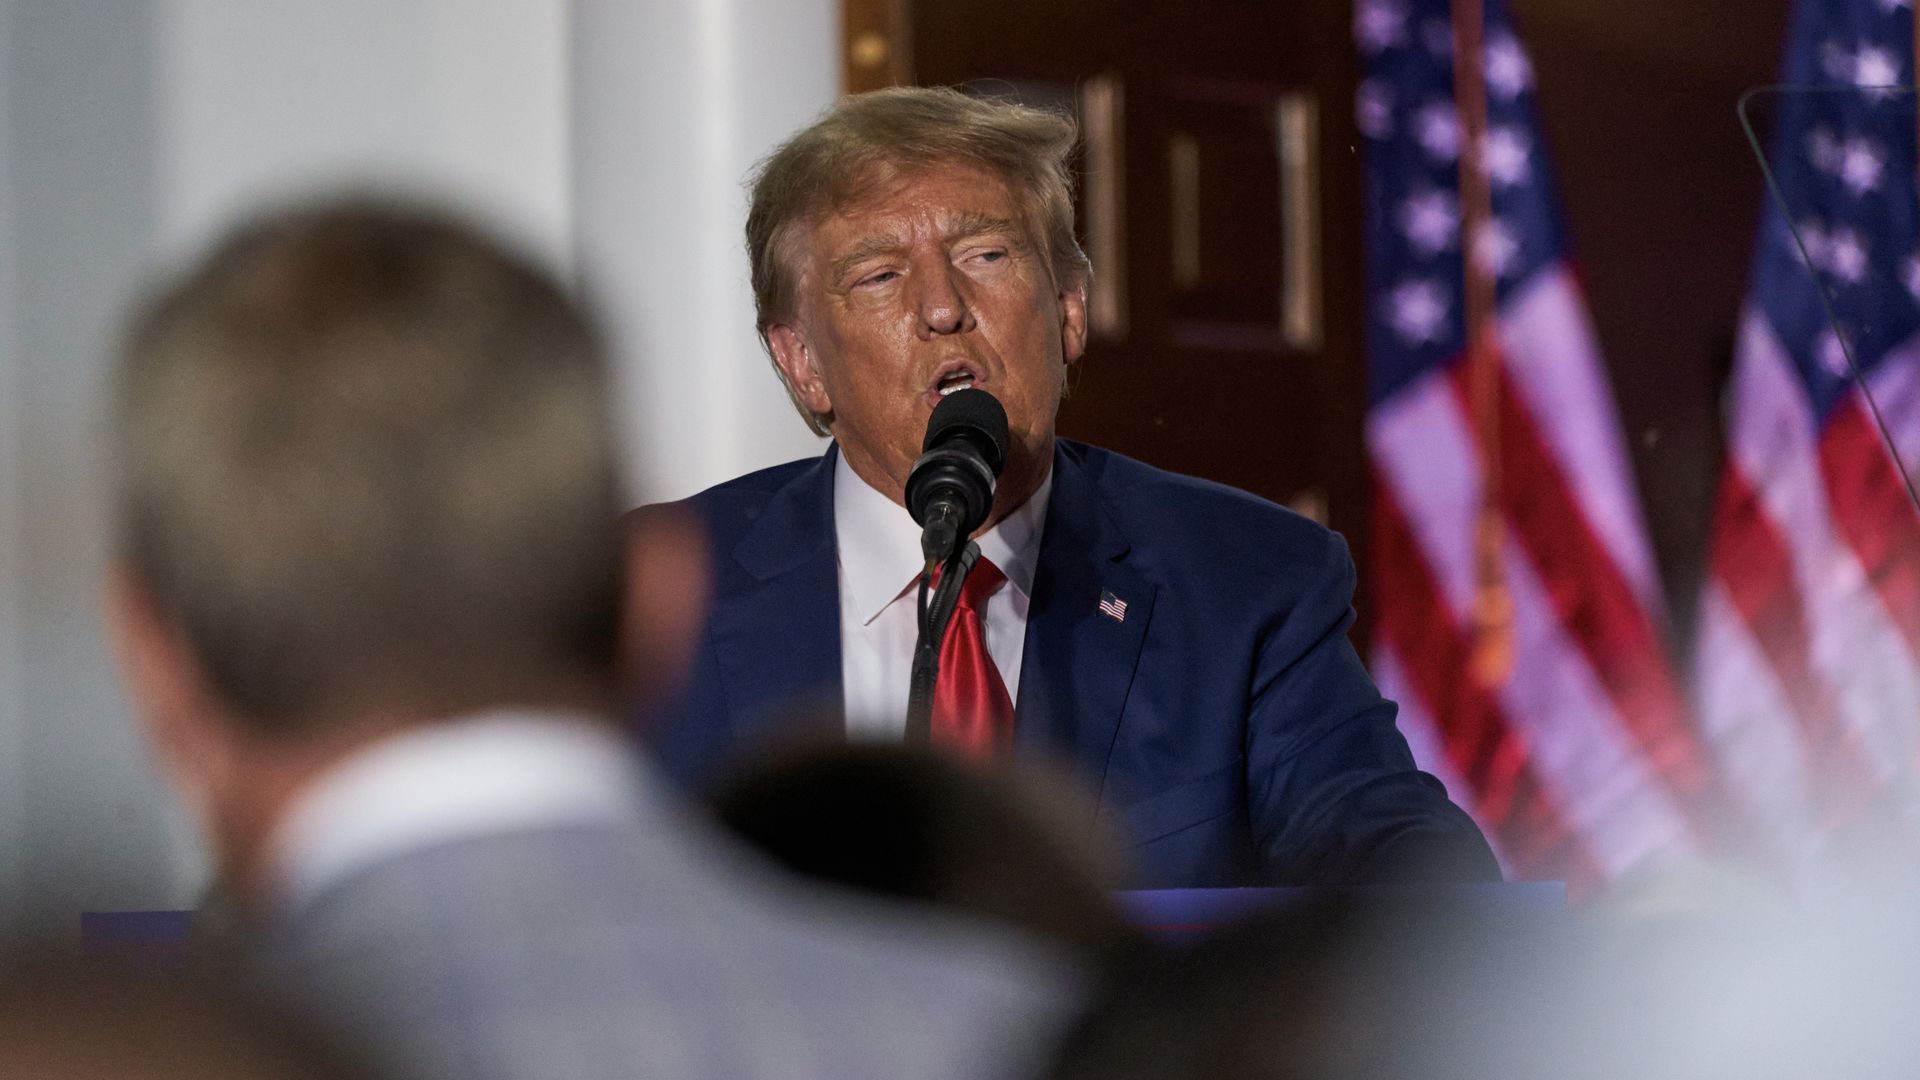 Former US President Donald Trump speaks during an event at Trump National Golf Club in Bedminster, New Jersey, US, on Tuesday, June 13, 2023